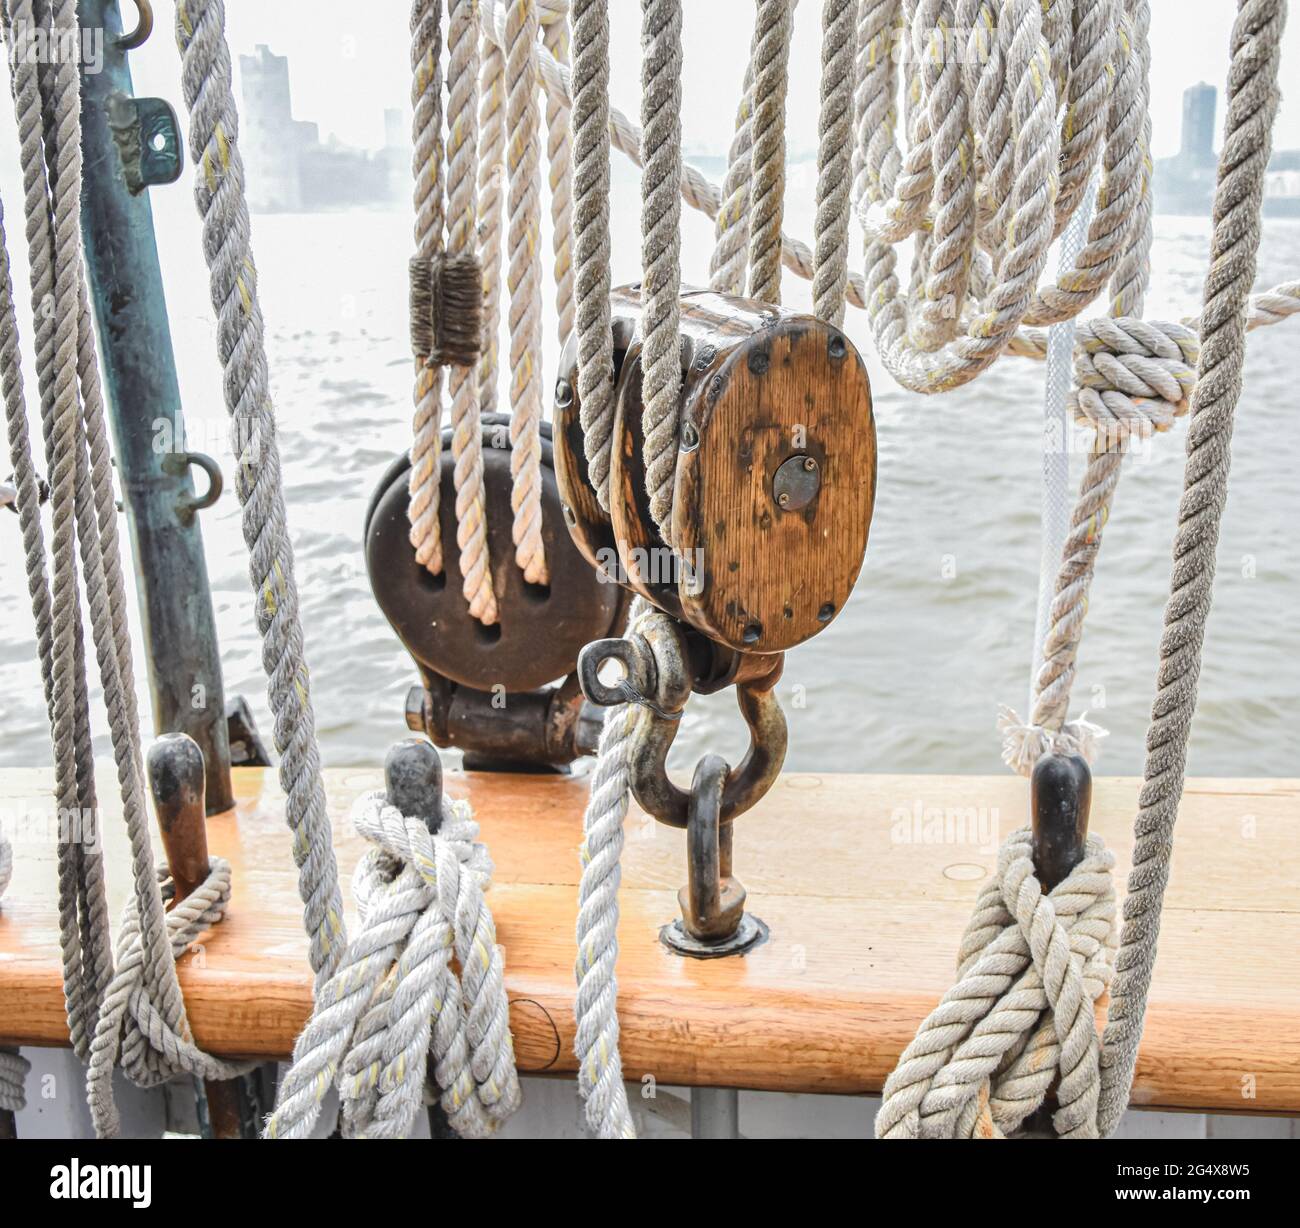 An area for rigging on an old sailing ship. Stock Photo